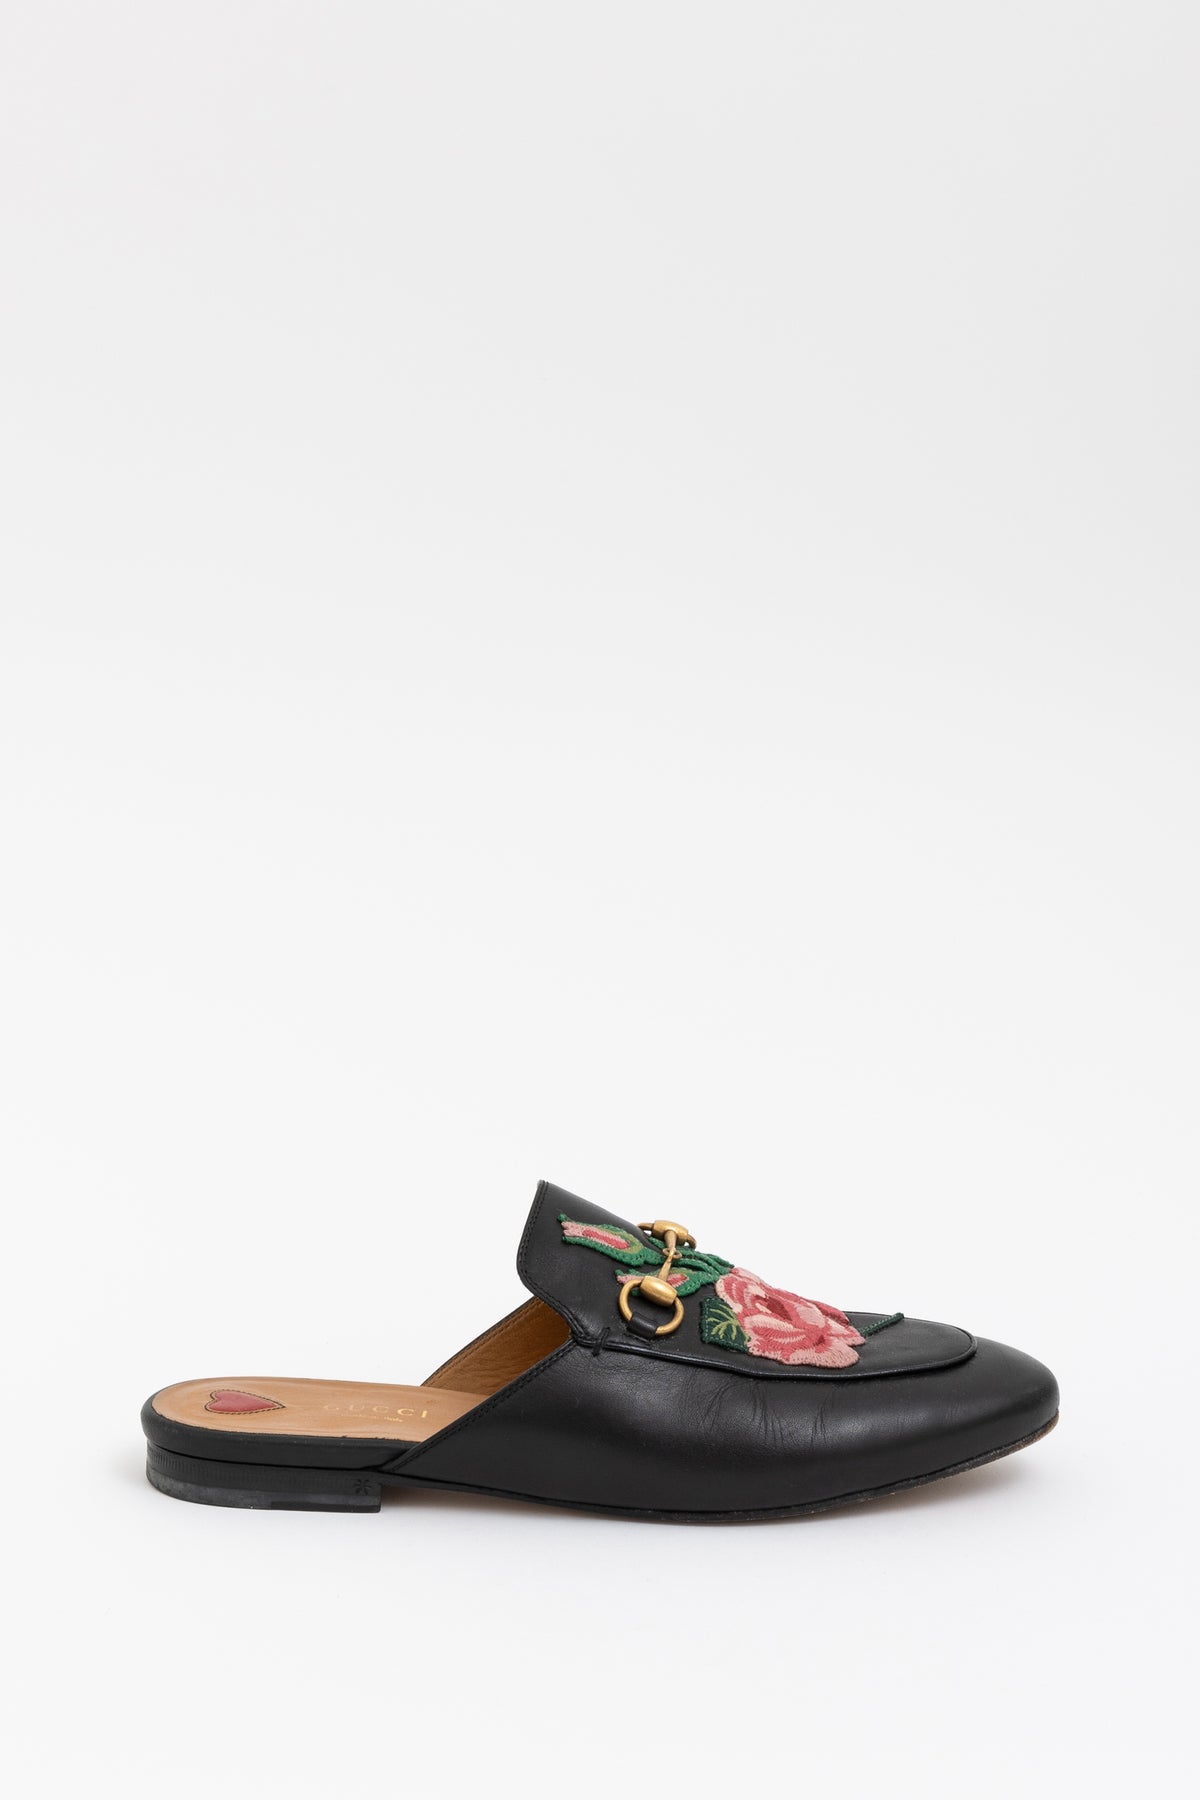 Floral Princetown Leather Slipper